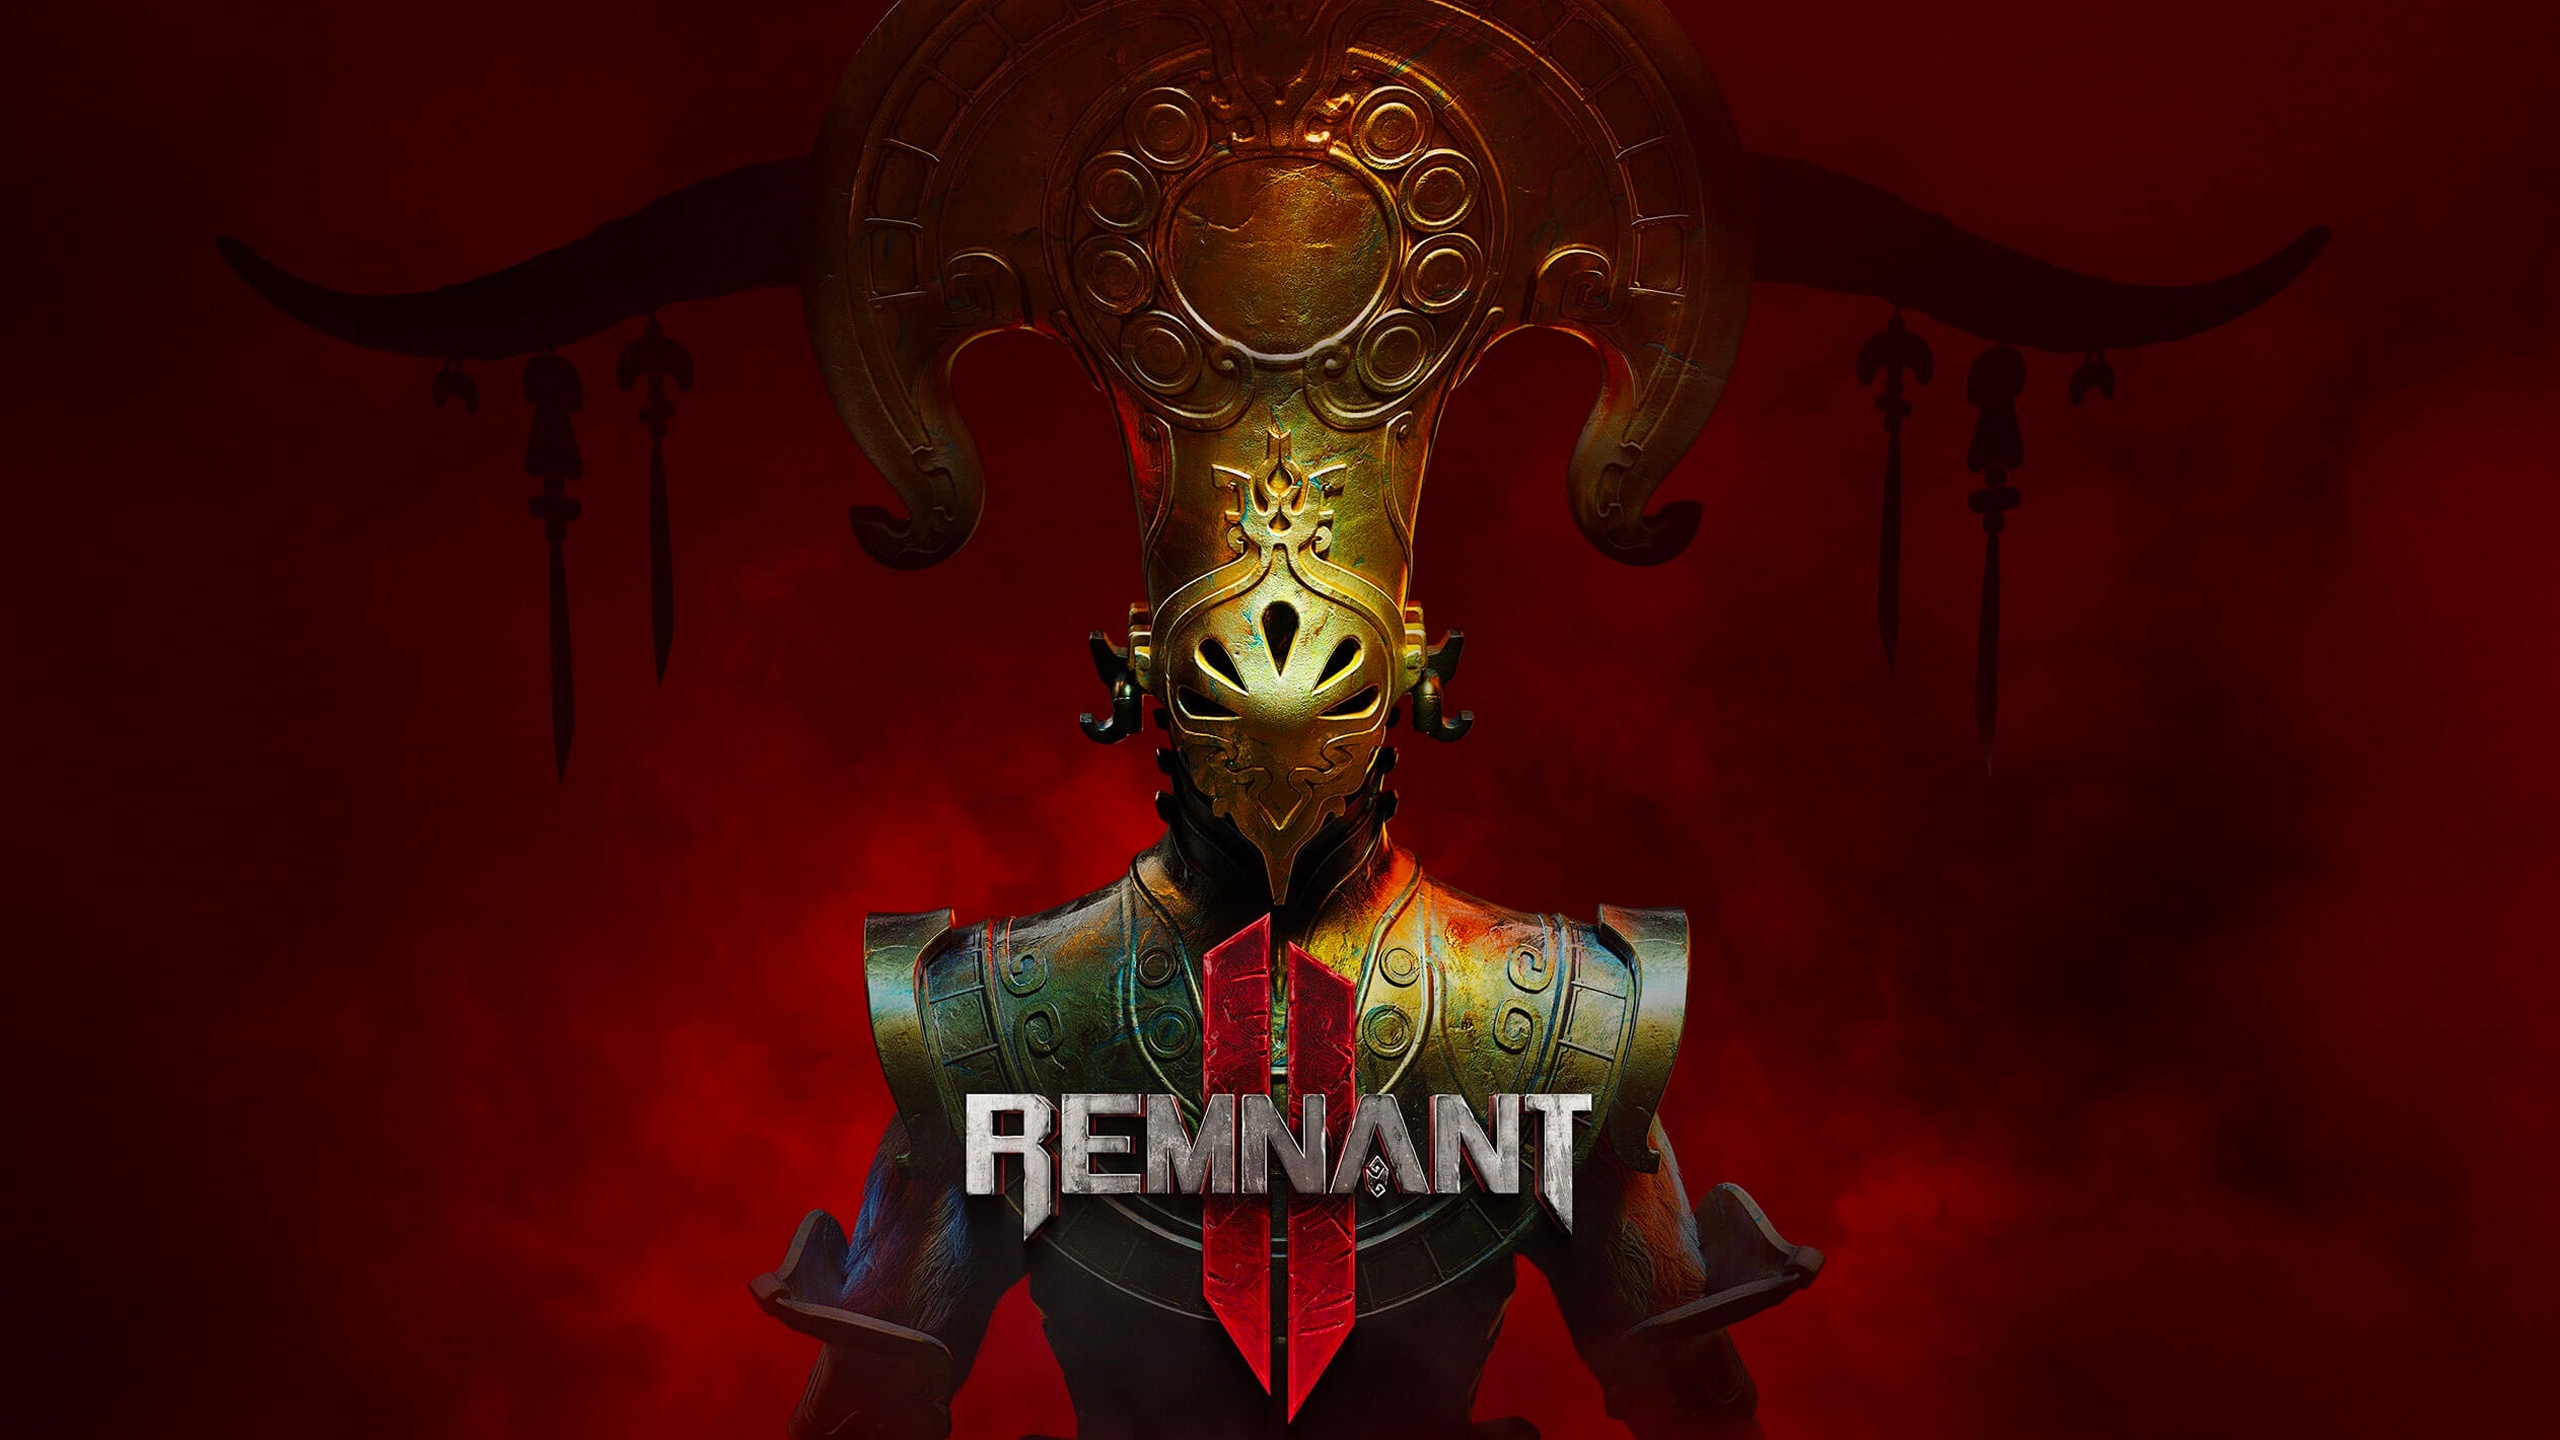 Buy Remnant 2 Steam